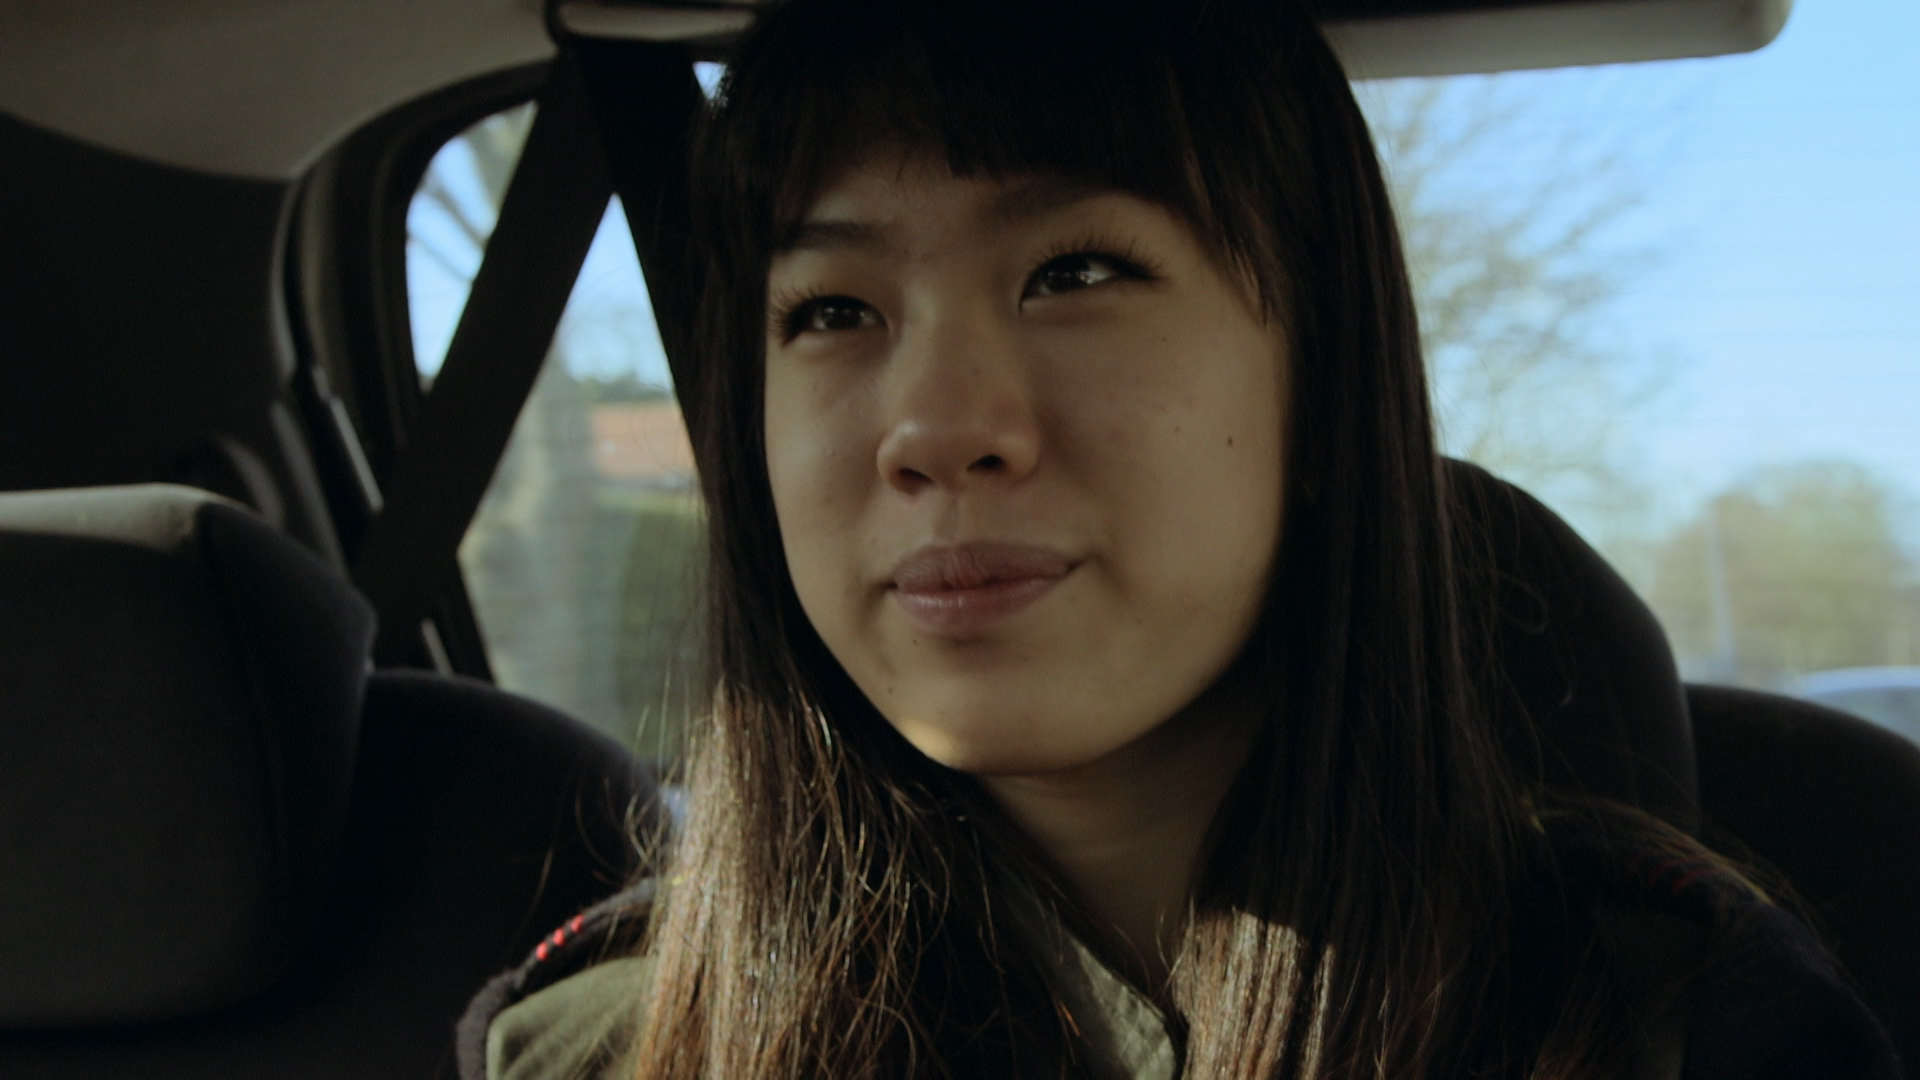 My Life: Adopted from China - close up of girl's face in sat in a car